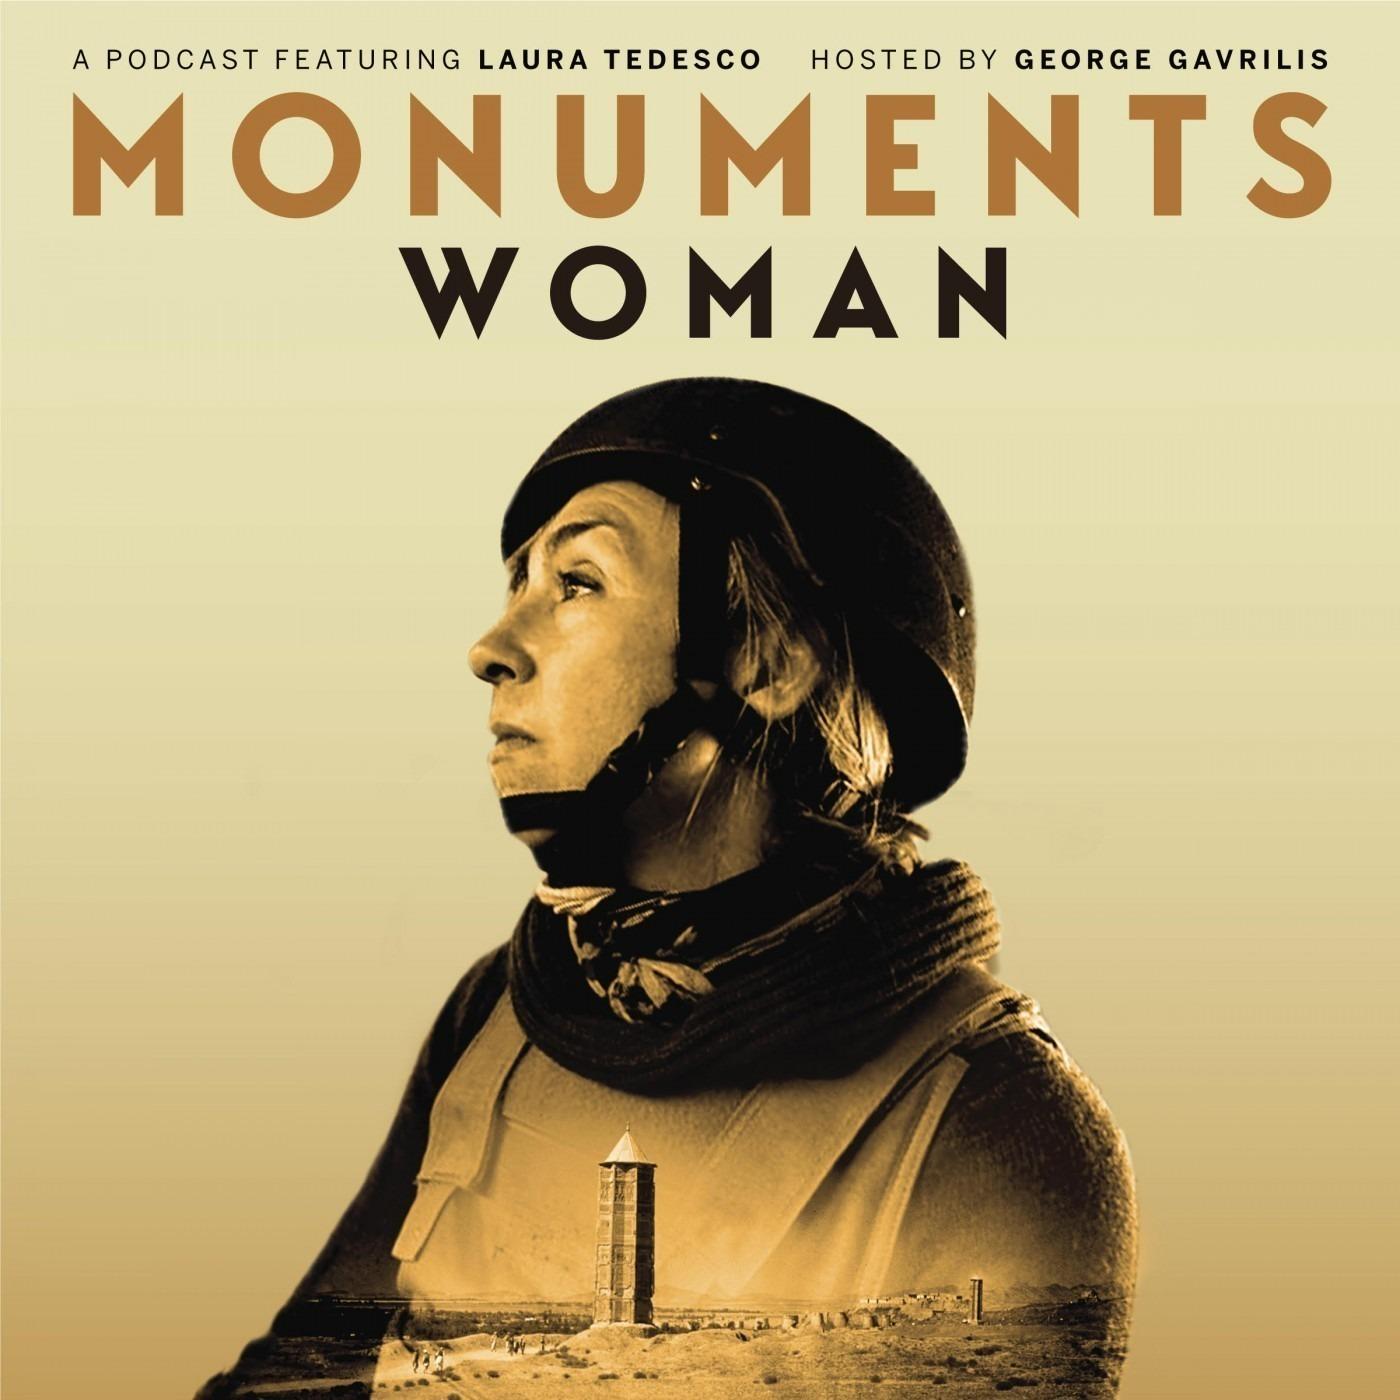 Monuments Woman